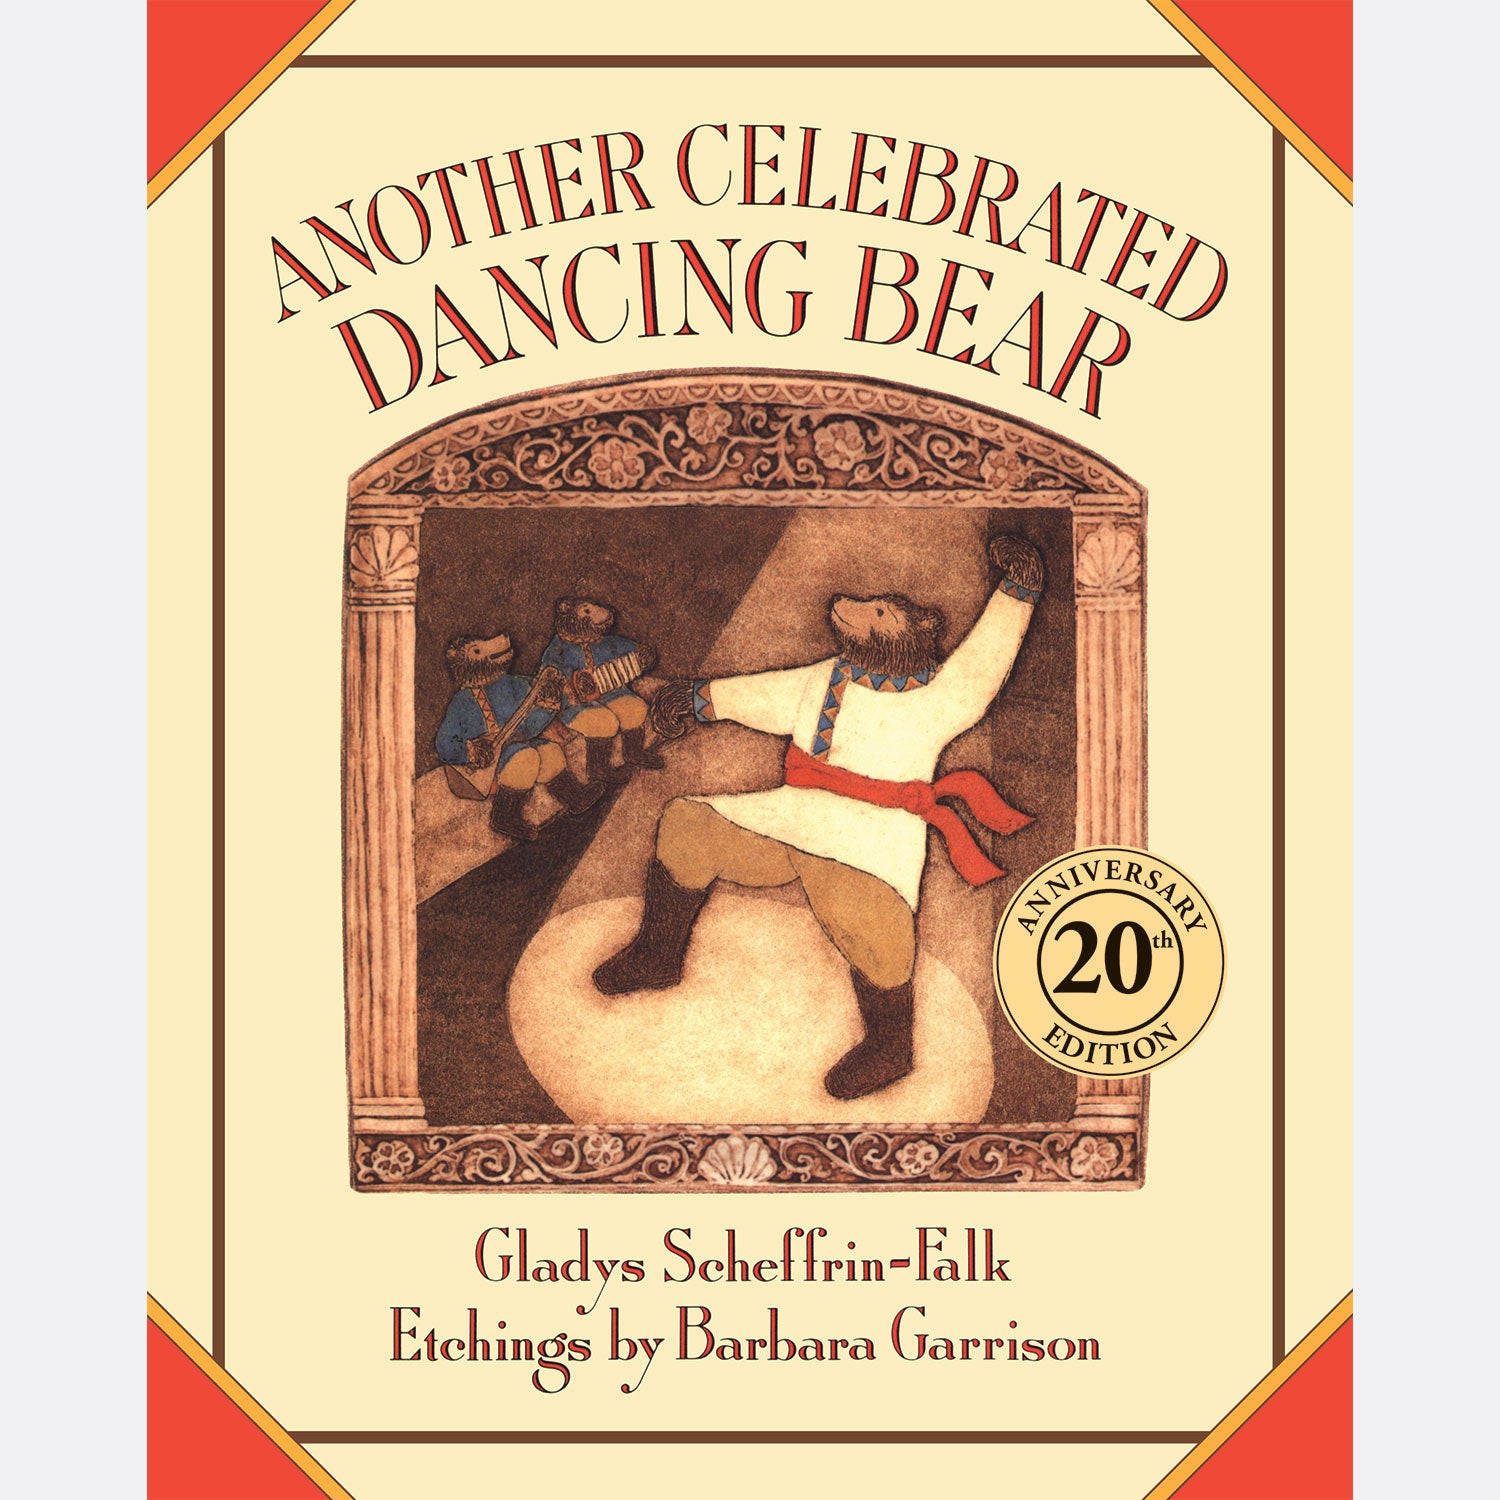 deanna pulido recommends Tale Of The Dancing Bear